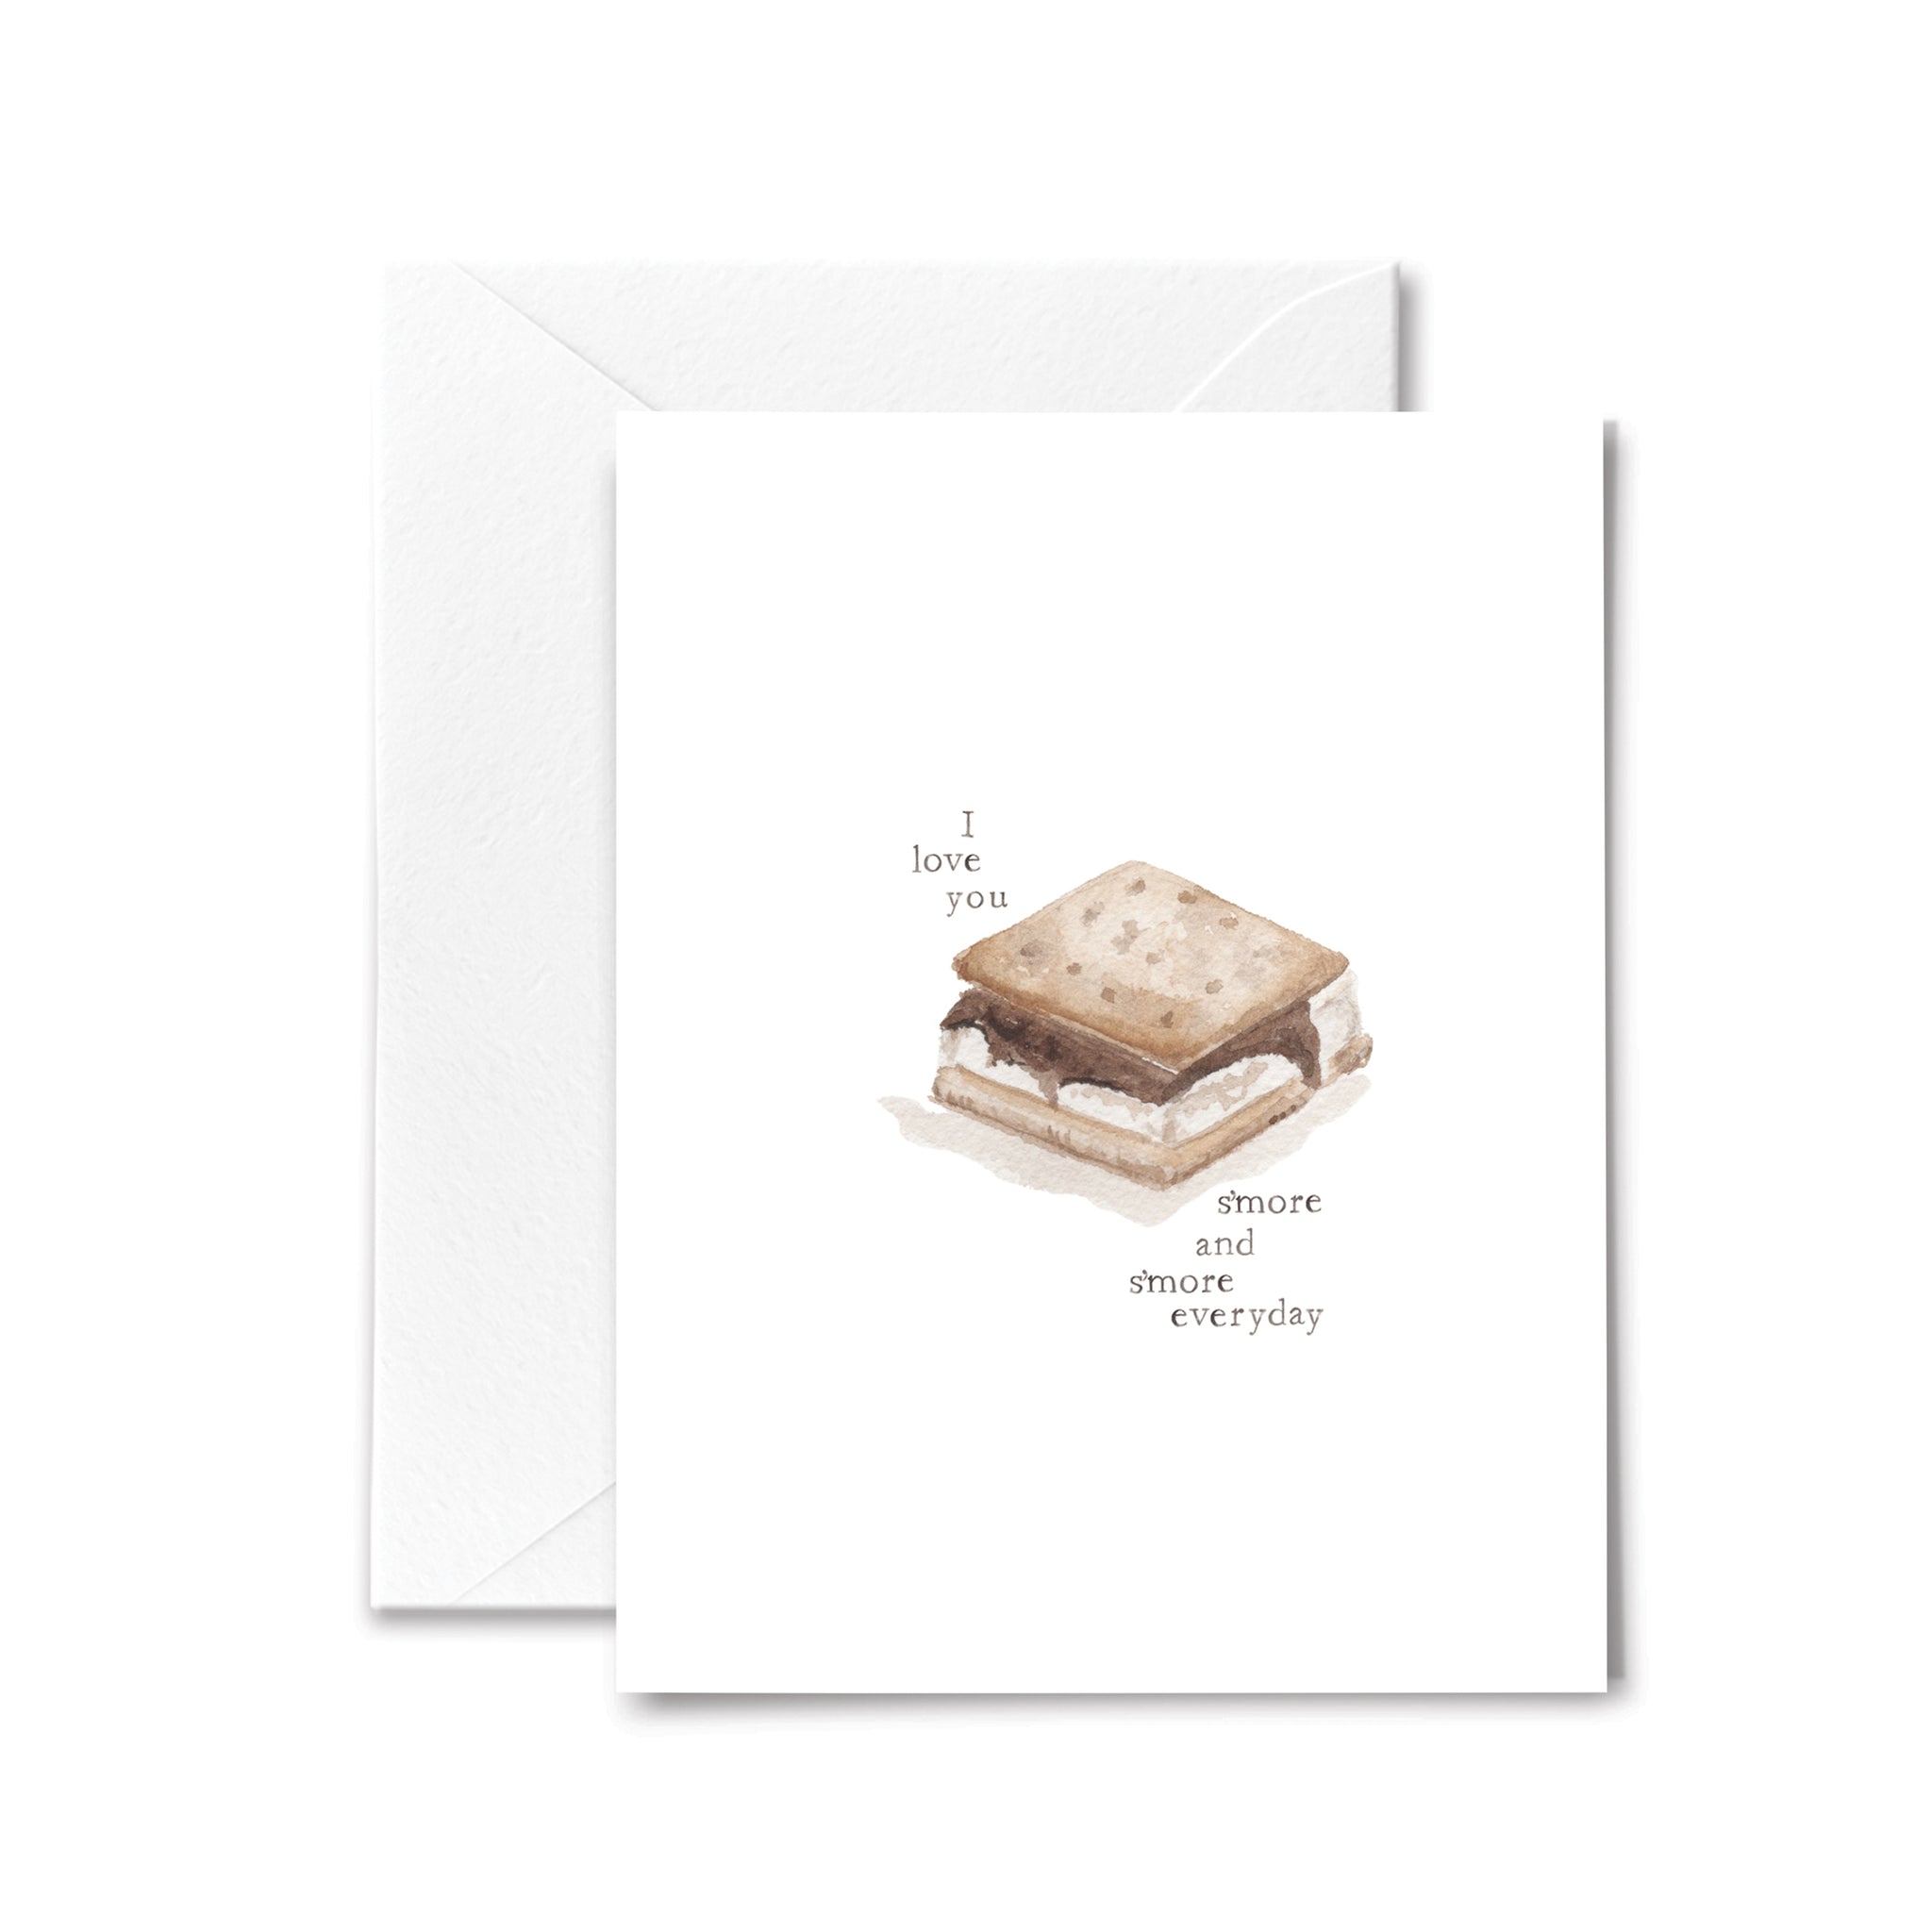 love card smore s'more anniversary everyday